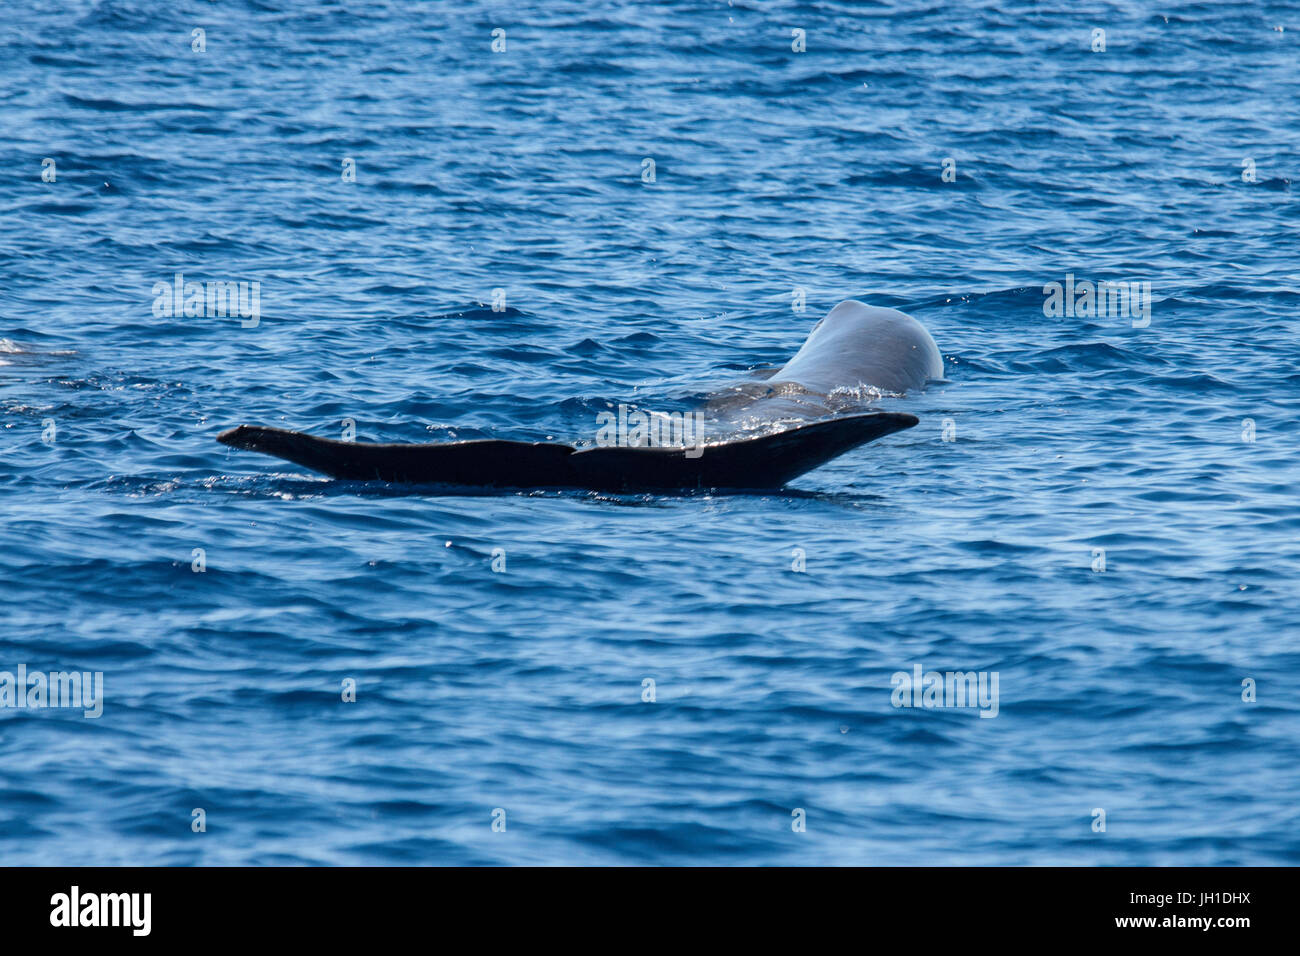 Sperm whale, Physeter macrocephalus, cachalot or Pottwal, stretching at surface, showing tail flukes, Azores, Atlantic Ocean Stock Photo